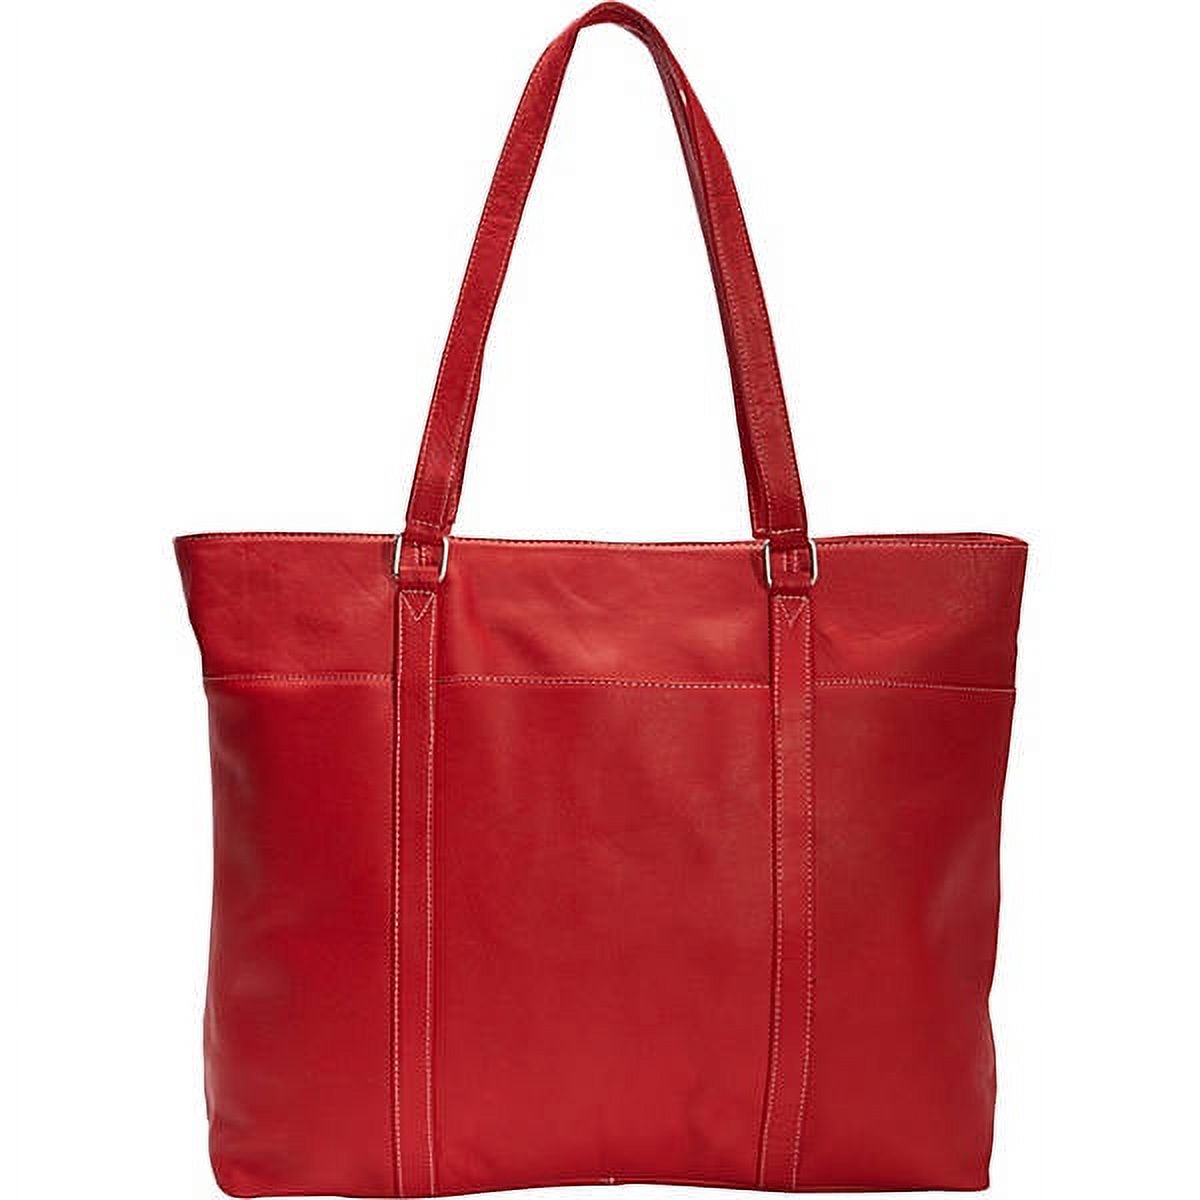 Le Donne Leather Women's Laptop Tote TR-1063 - image 3 of 4